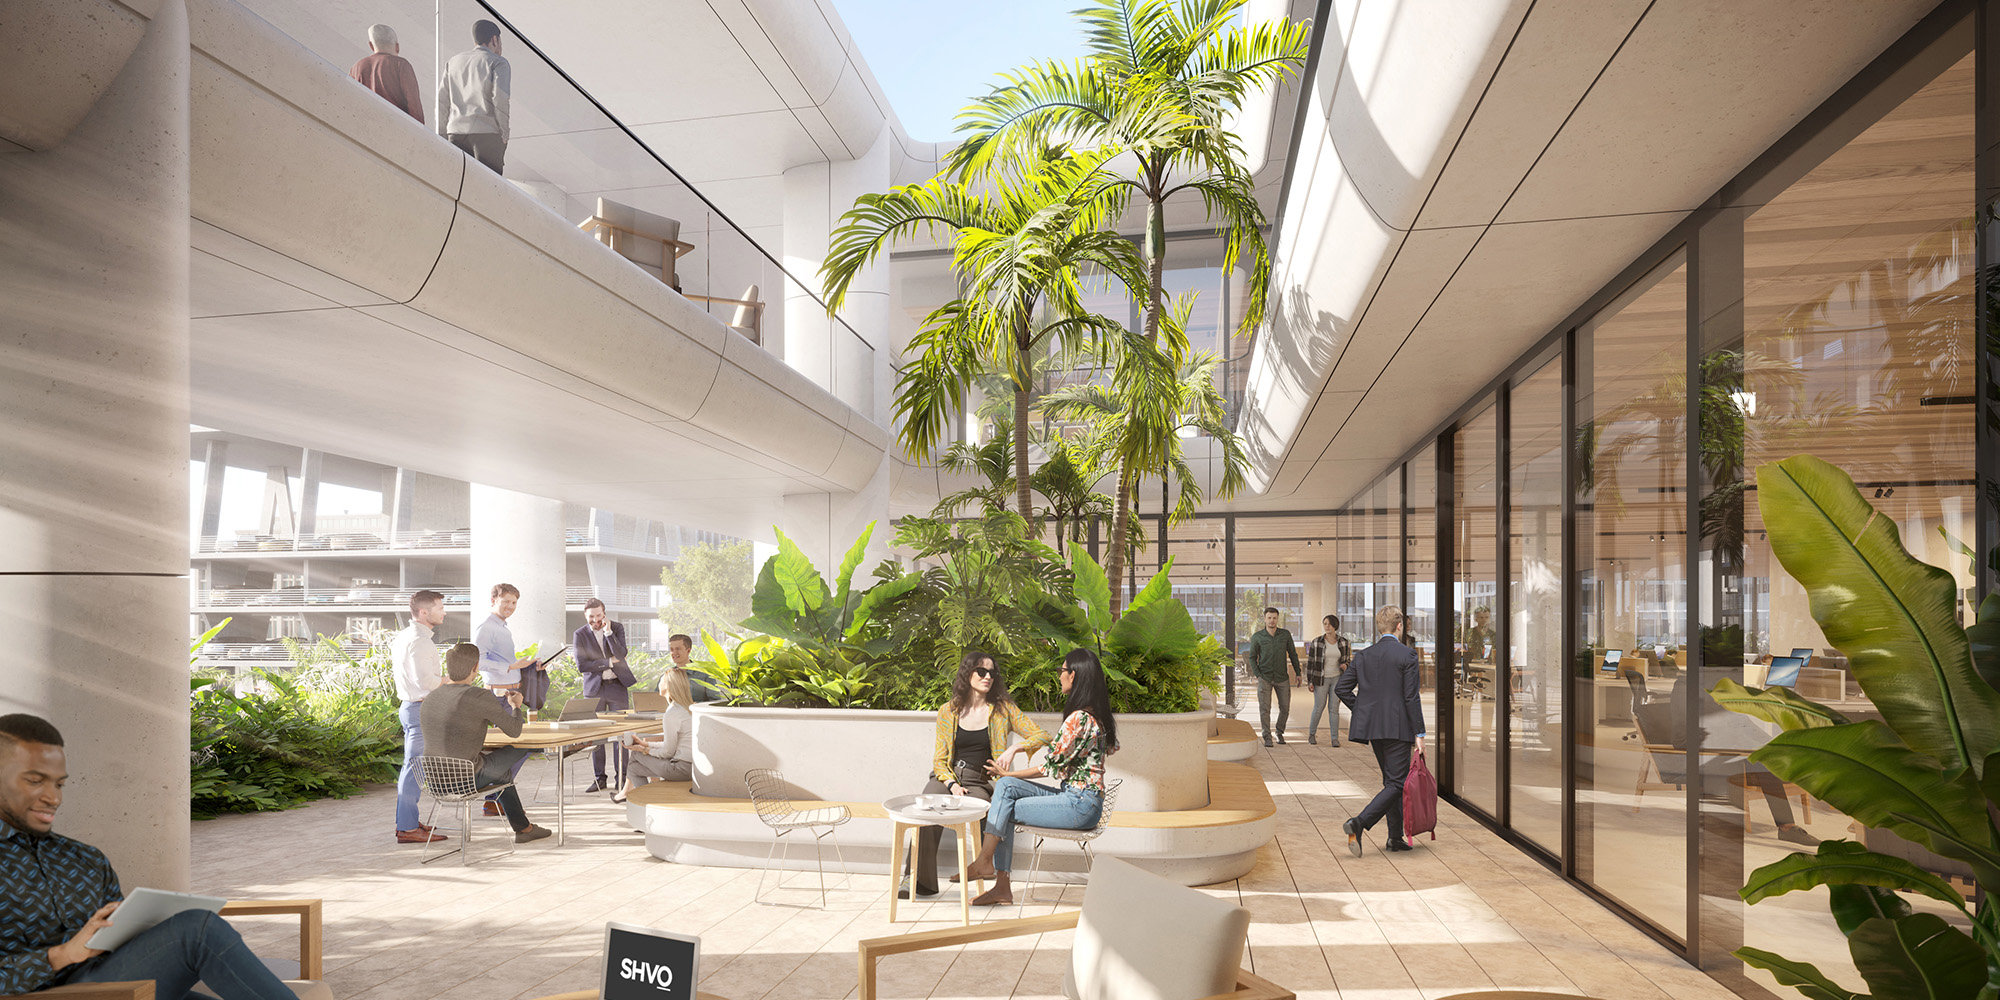 Designs For Mixed-use Building On Miami Beach’s Alton Road Revealed